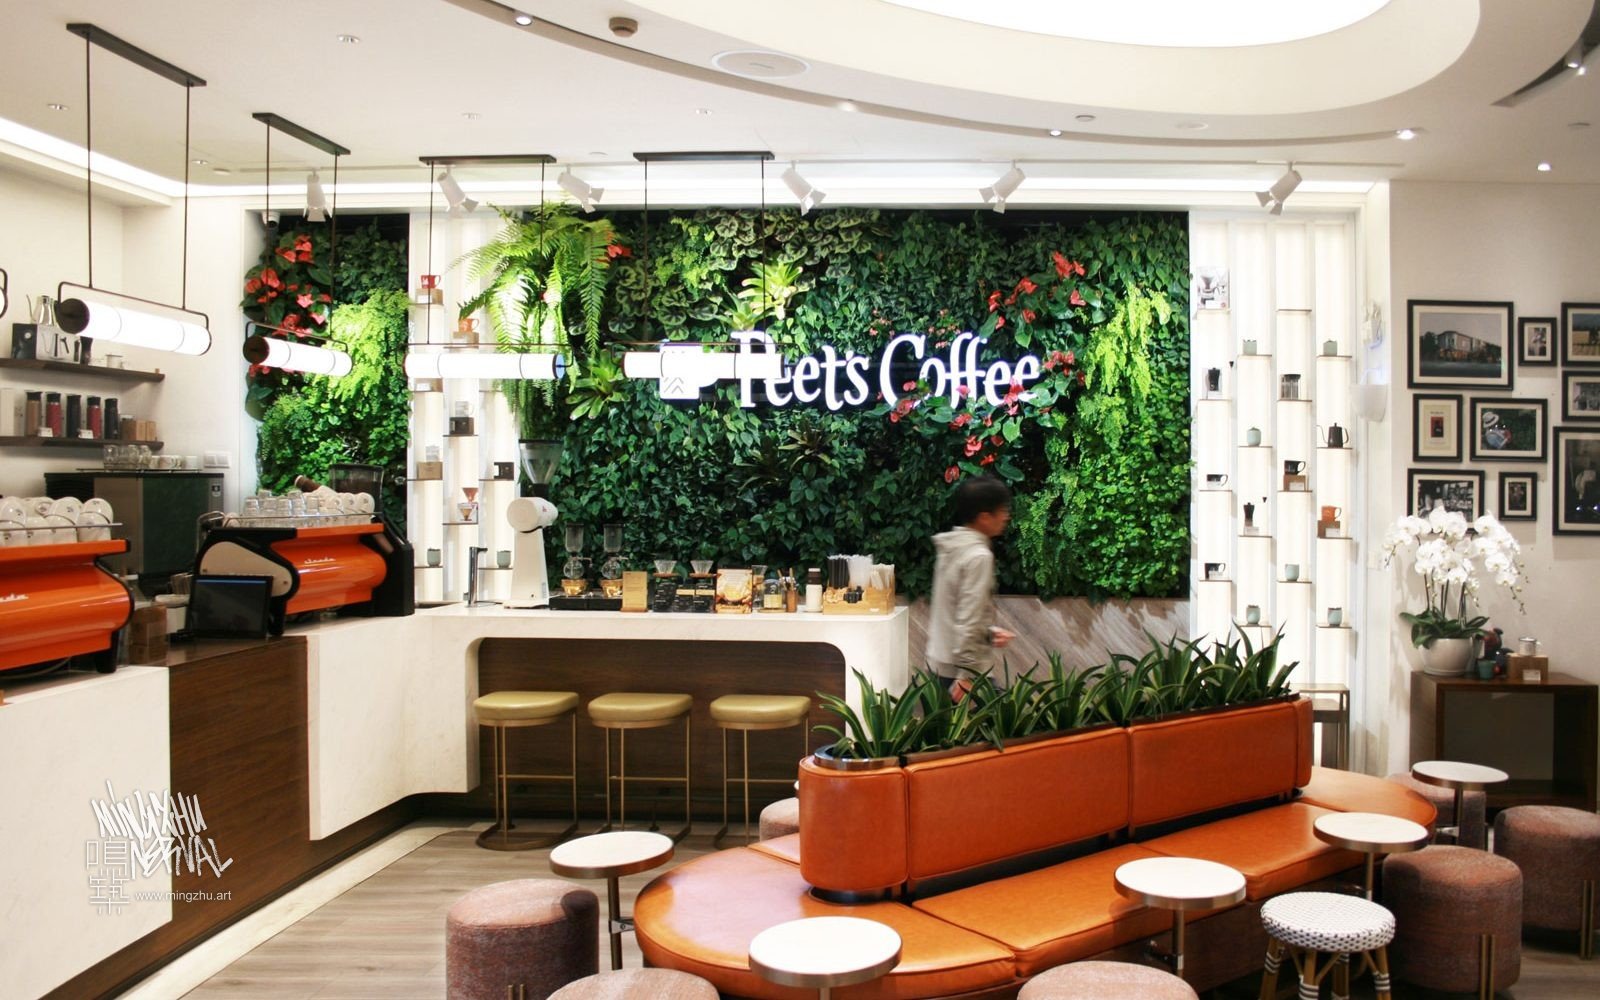 At Mingzhu Nerval, we thrive at creating the most beautiful vertical gardens in the world. For Peet's Coffee, we created a Californian living wall design – Shanghai, 2019.